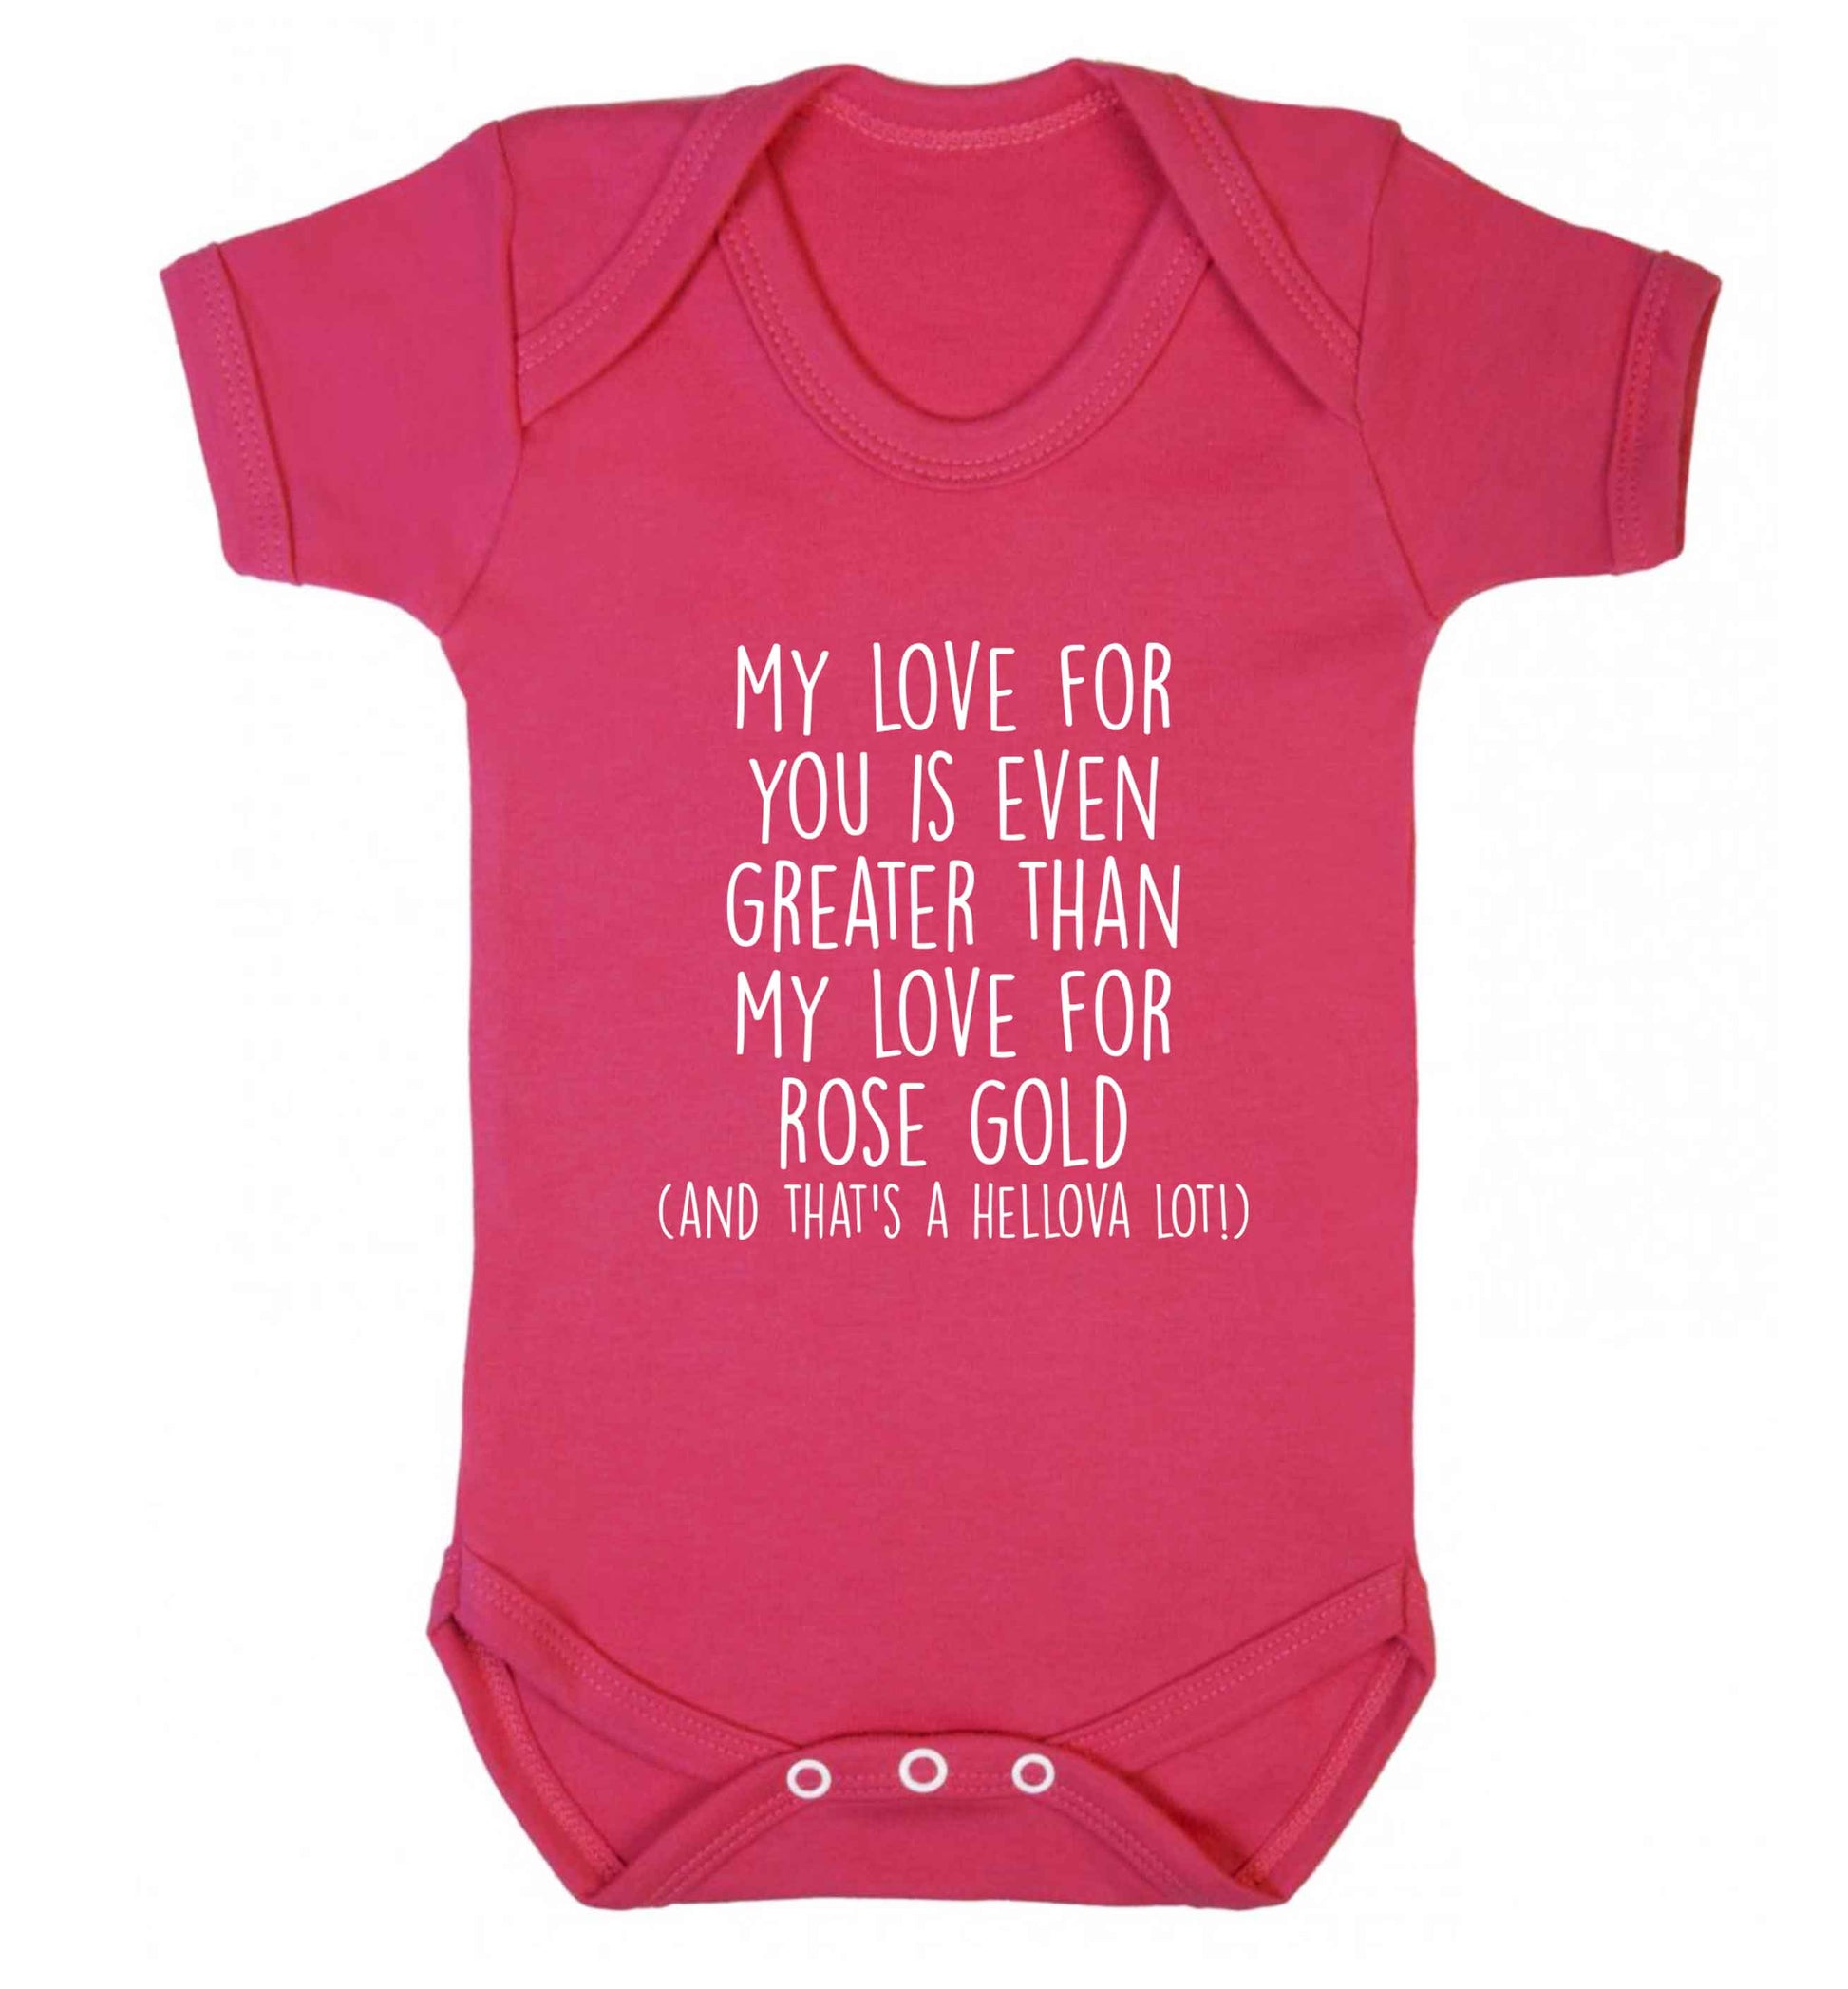 My love for you is even greater than my love for rose gold (and that's a hellova lot) baby vest dark pink 18-24 months